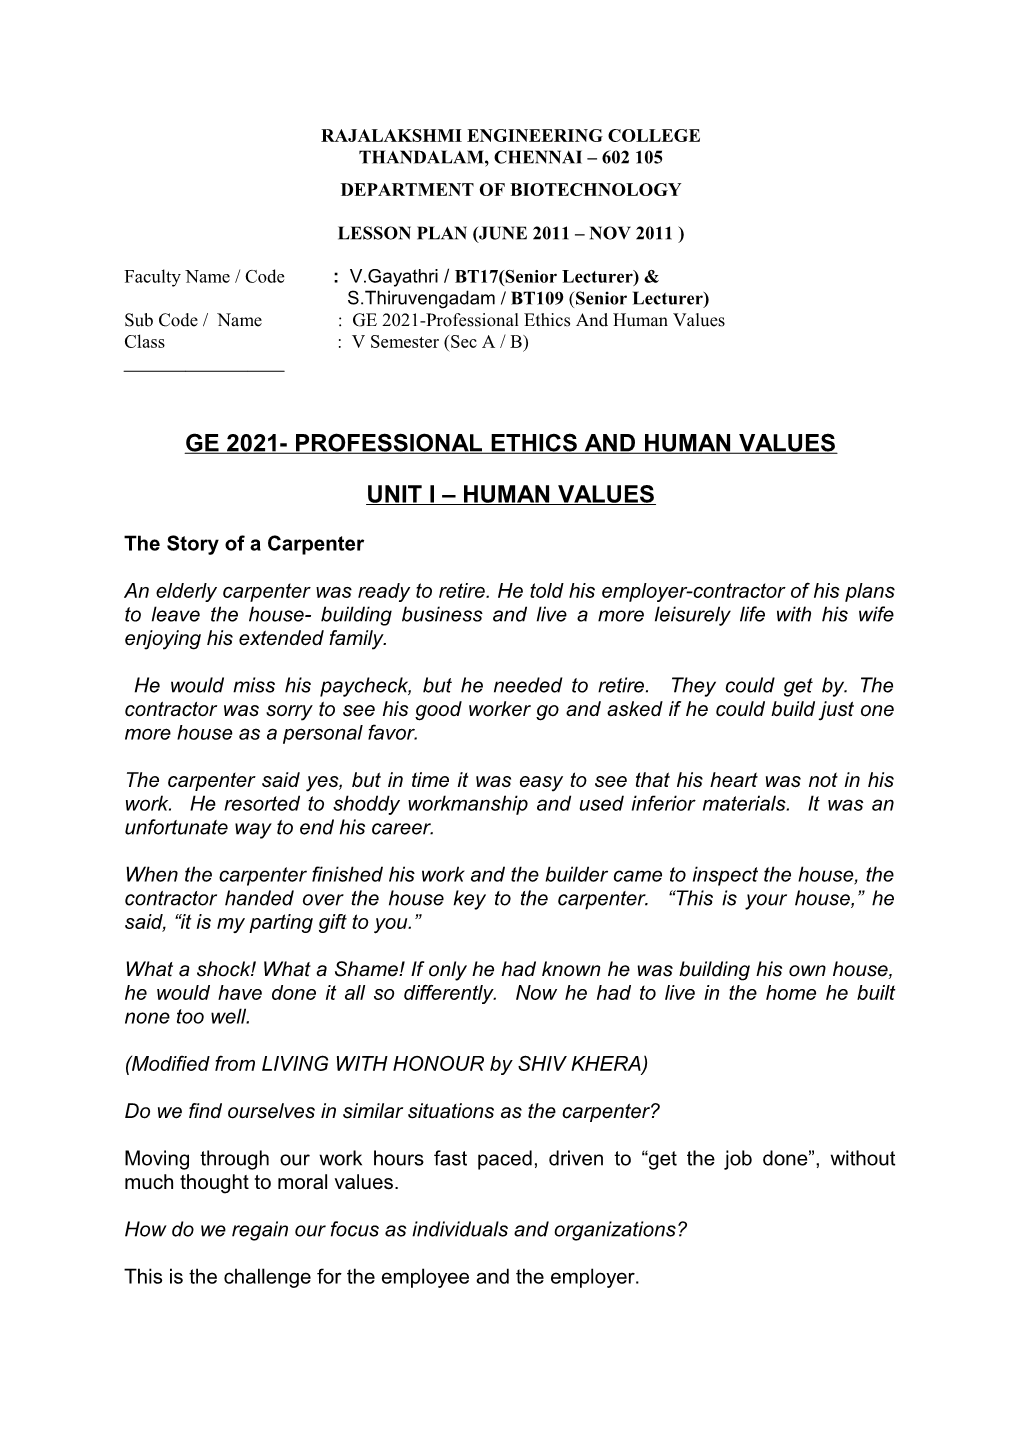 Ge 2201- Professional Ethics and Human Values